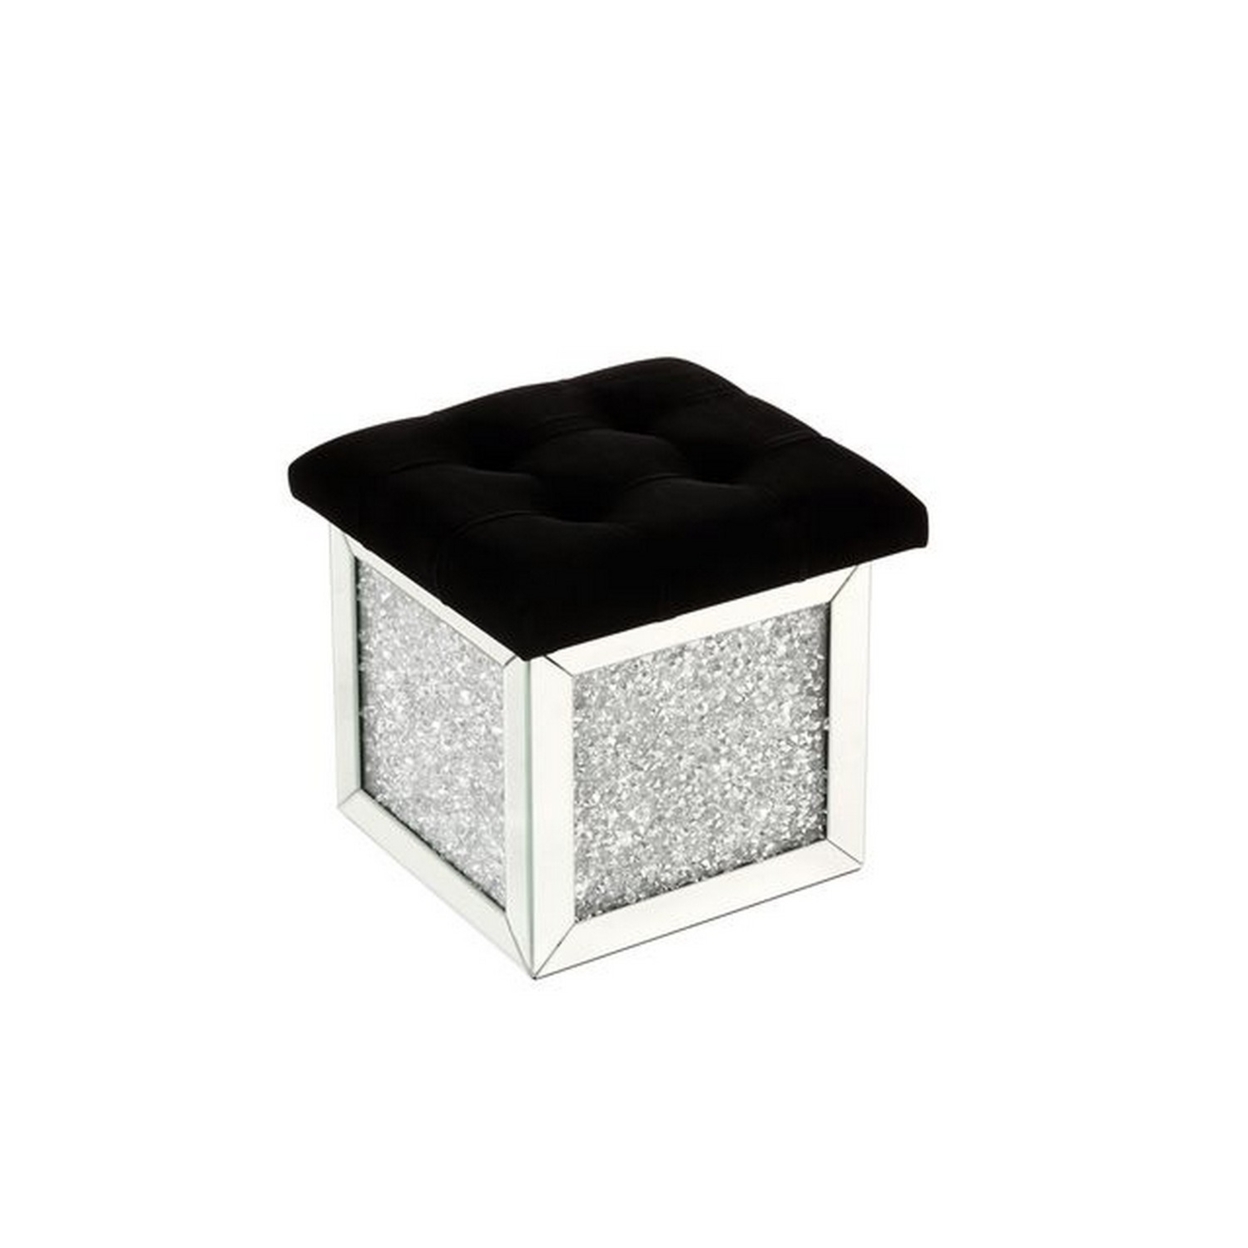 Mirrored Ottoman With Tufted Seat And Faux Diamonds, Silver- Saltoro Sherpi